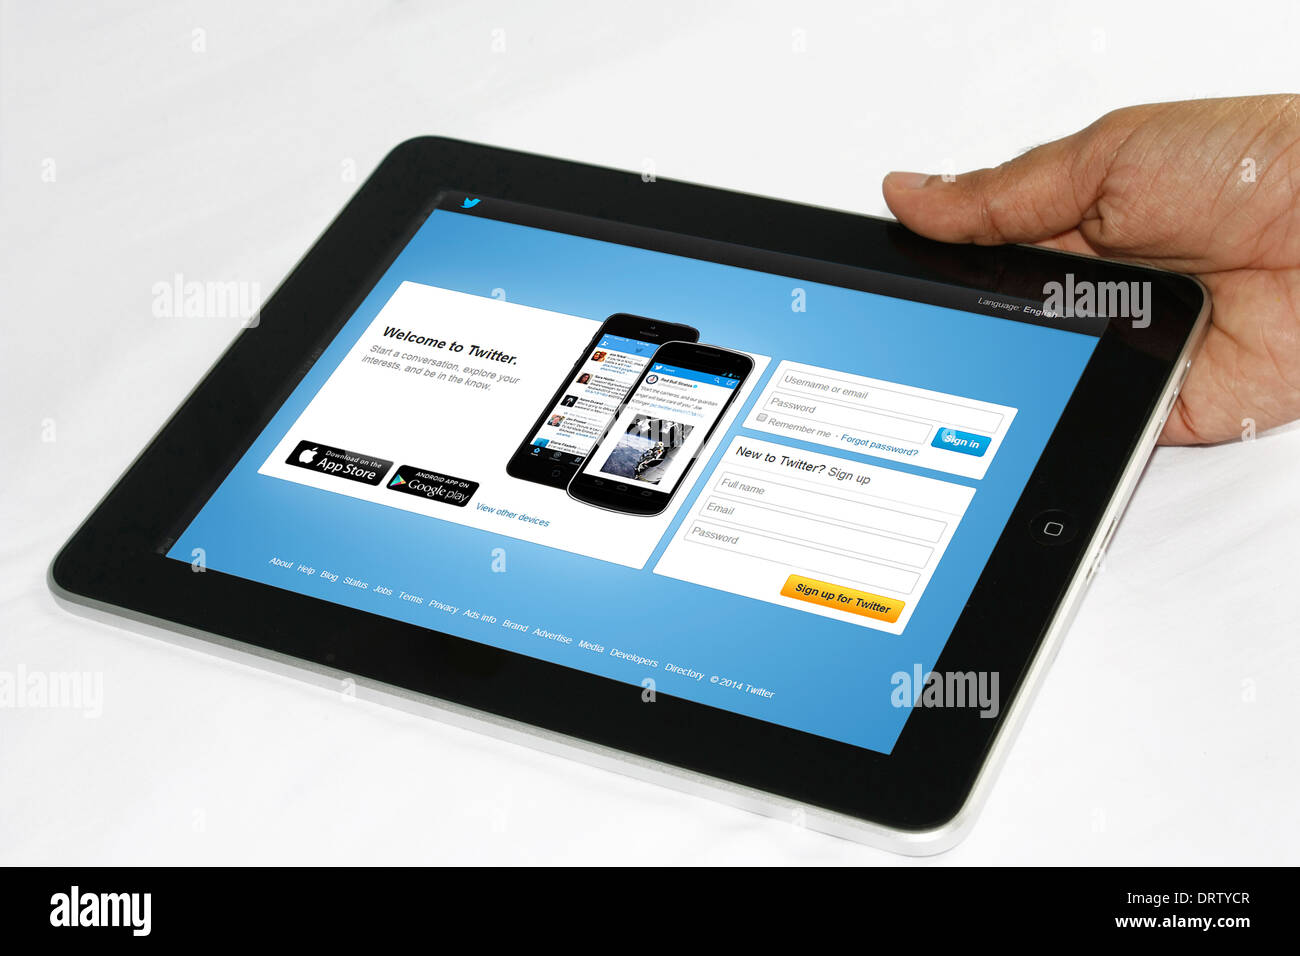 An ipad showing twitter app download web page Stock Photo